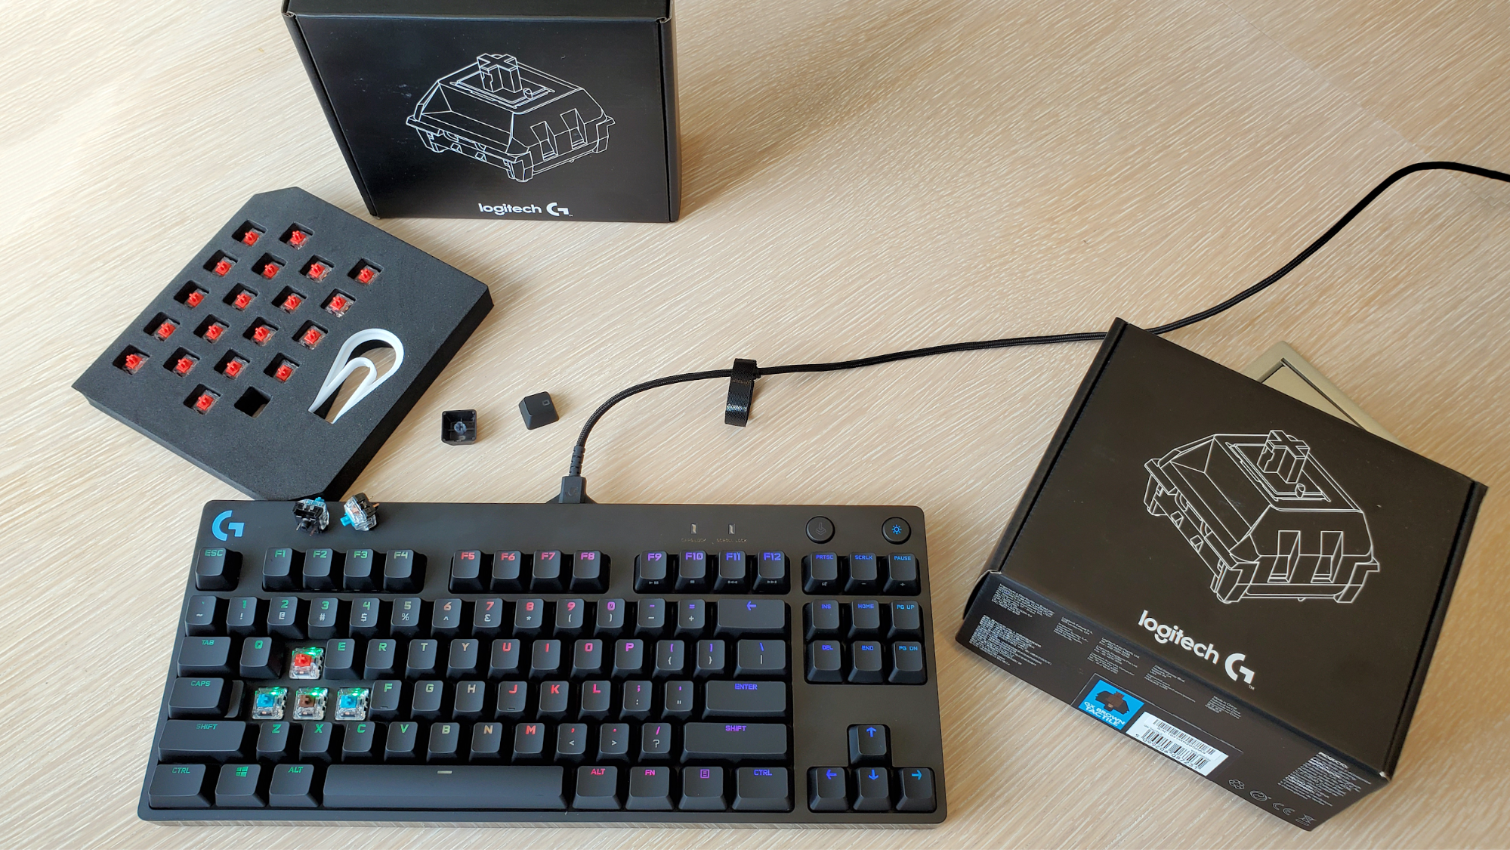 Hands On: Logitech's G Pro X Keyboard Brings Swappable Mechanical Switches to the Mainstream | Tom's